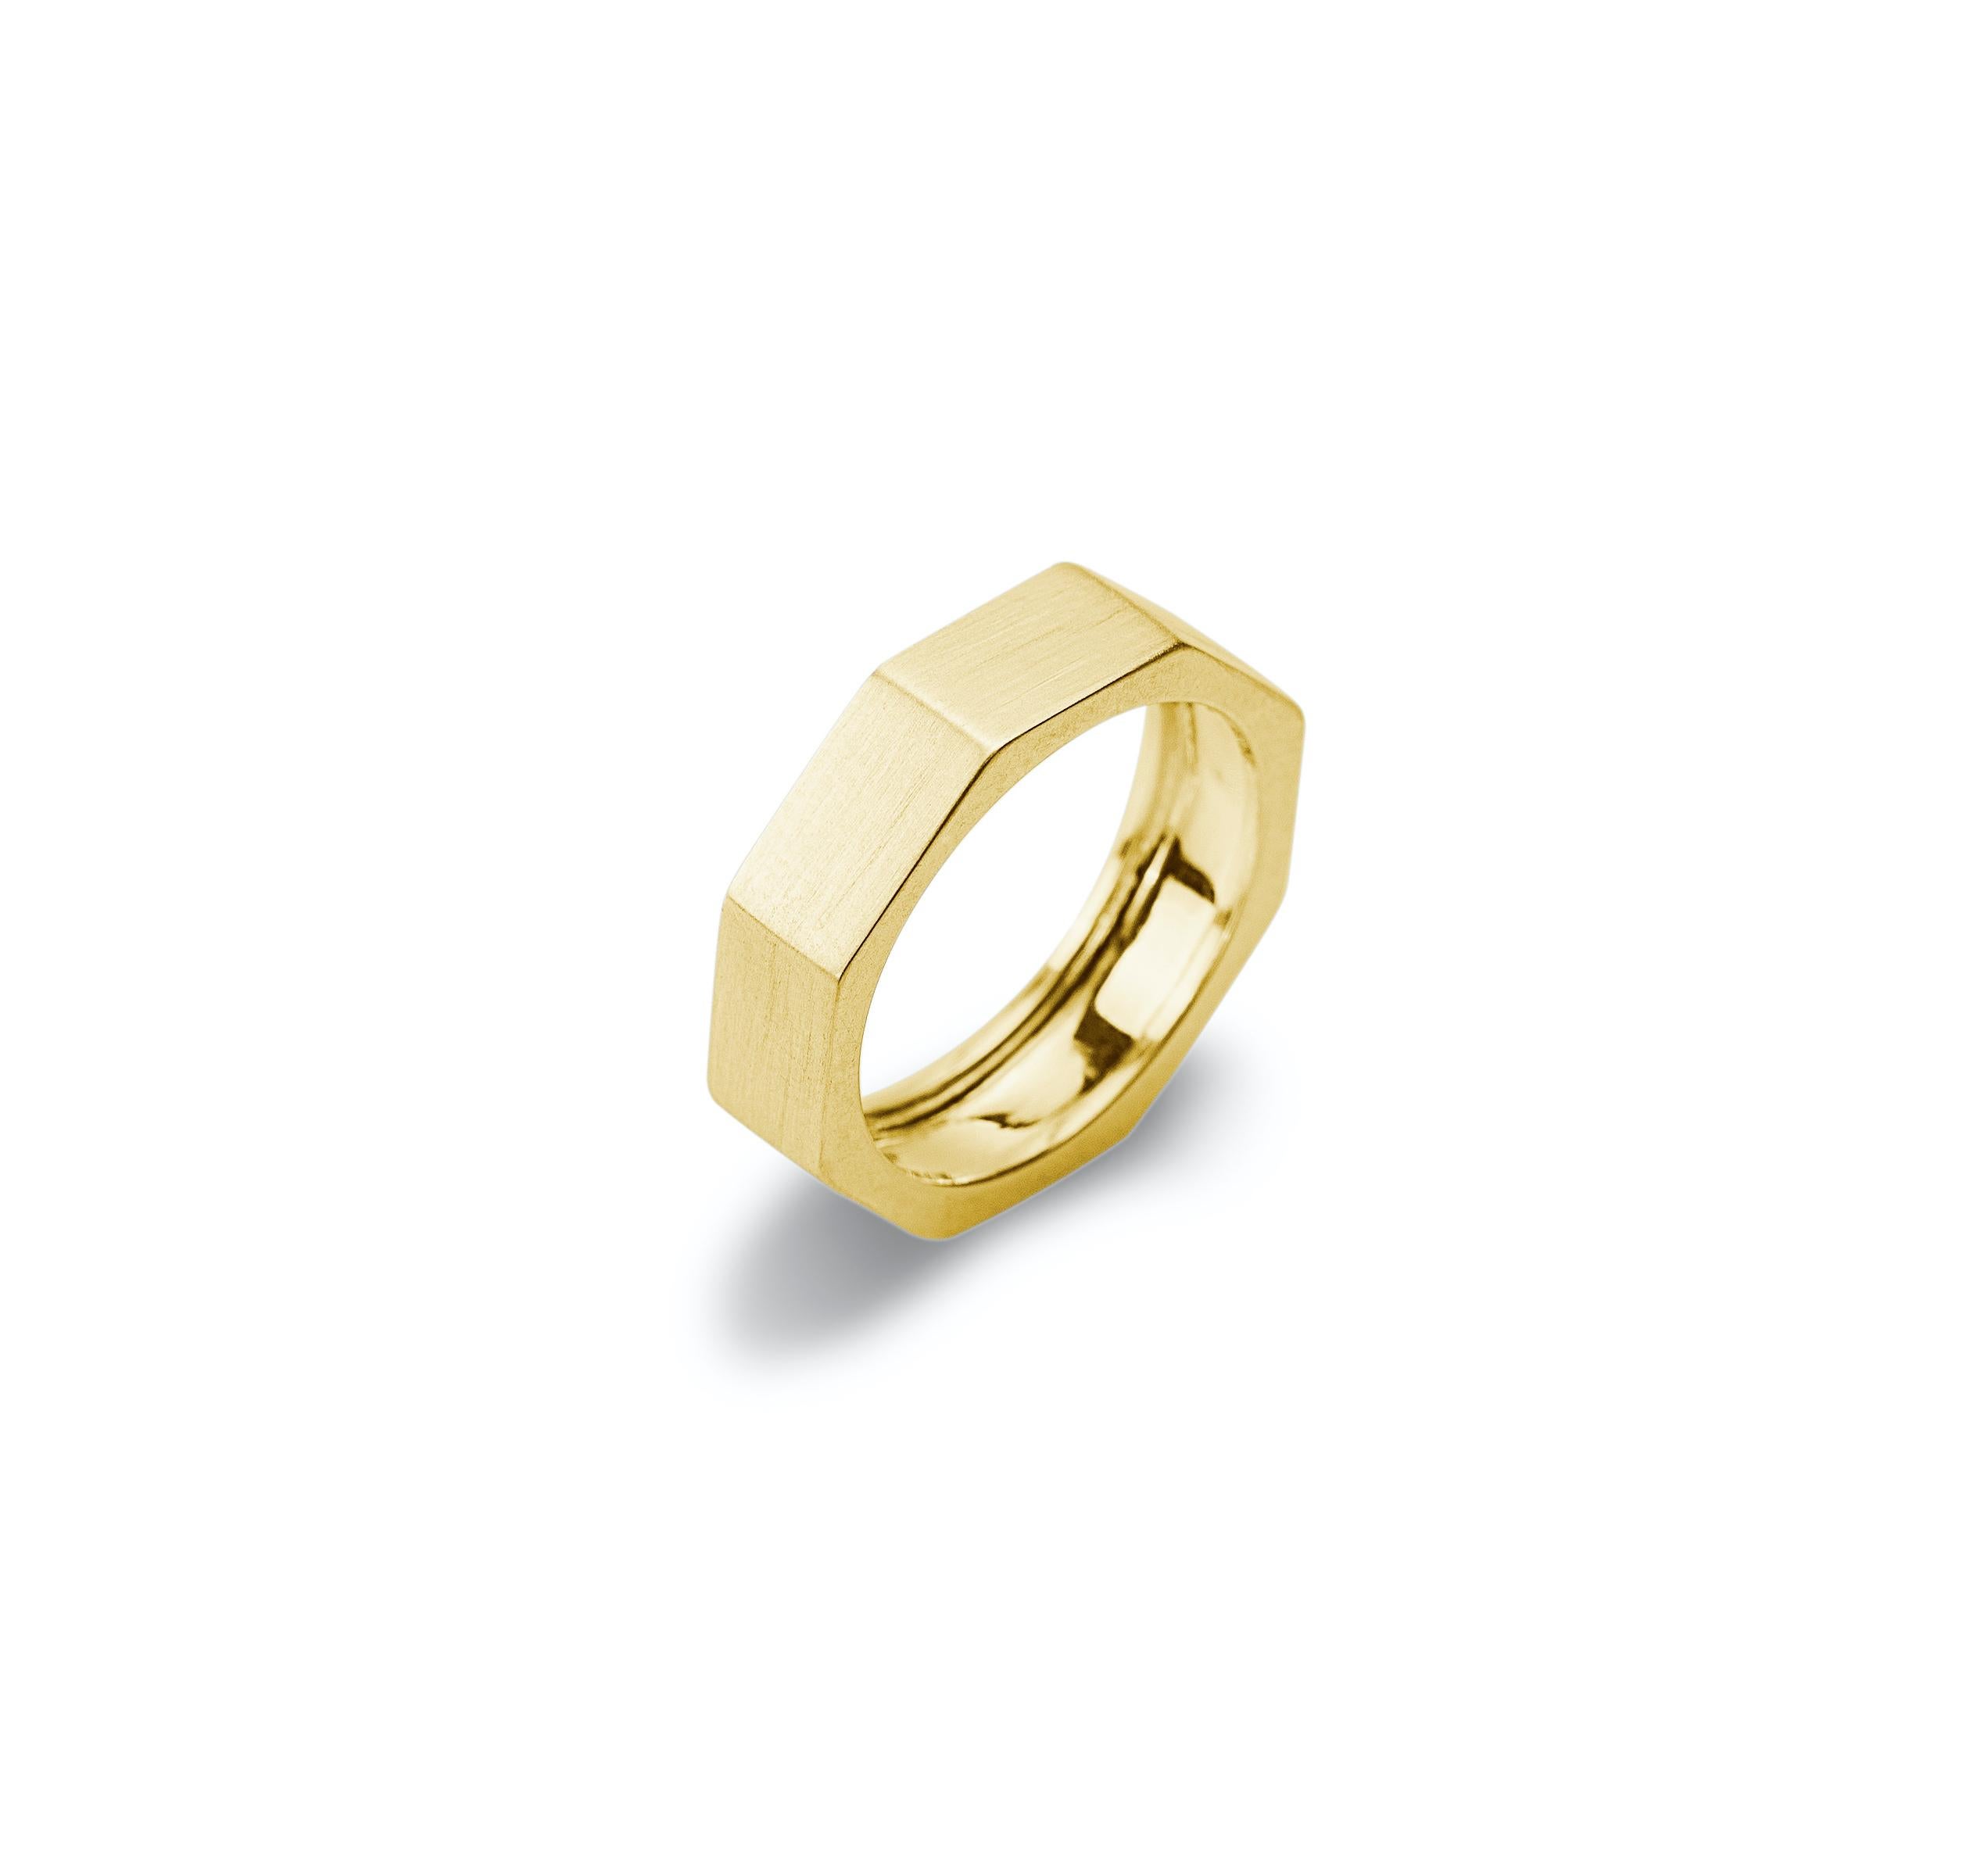 Customizable 14 Karats Yellow Gold Satin Octagon Unisex Deco Style Modern Ring 
This beautiful satin ring is finely handcrafted in yellow gold by expert artisan and slightly hammered to adapt better to the octagonal shape and fit a modern design.